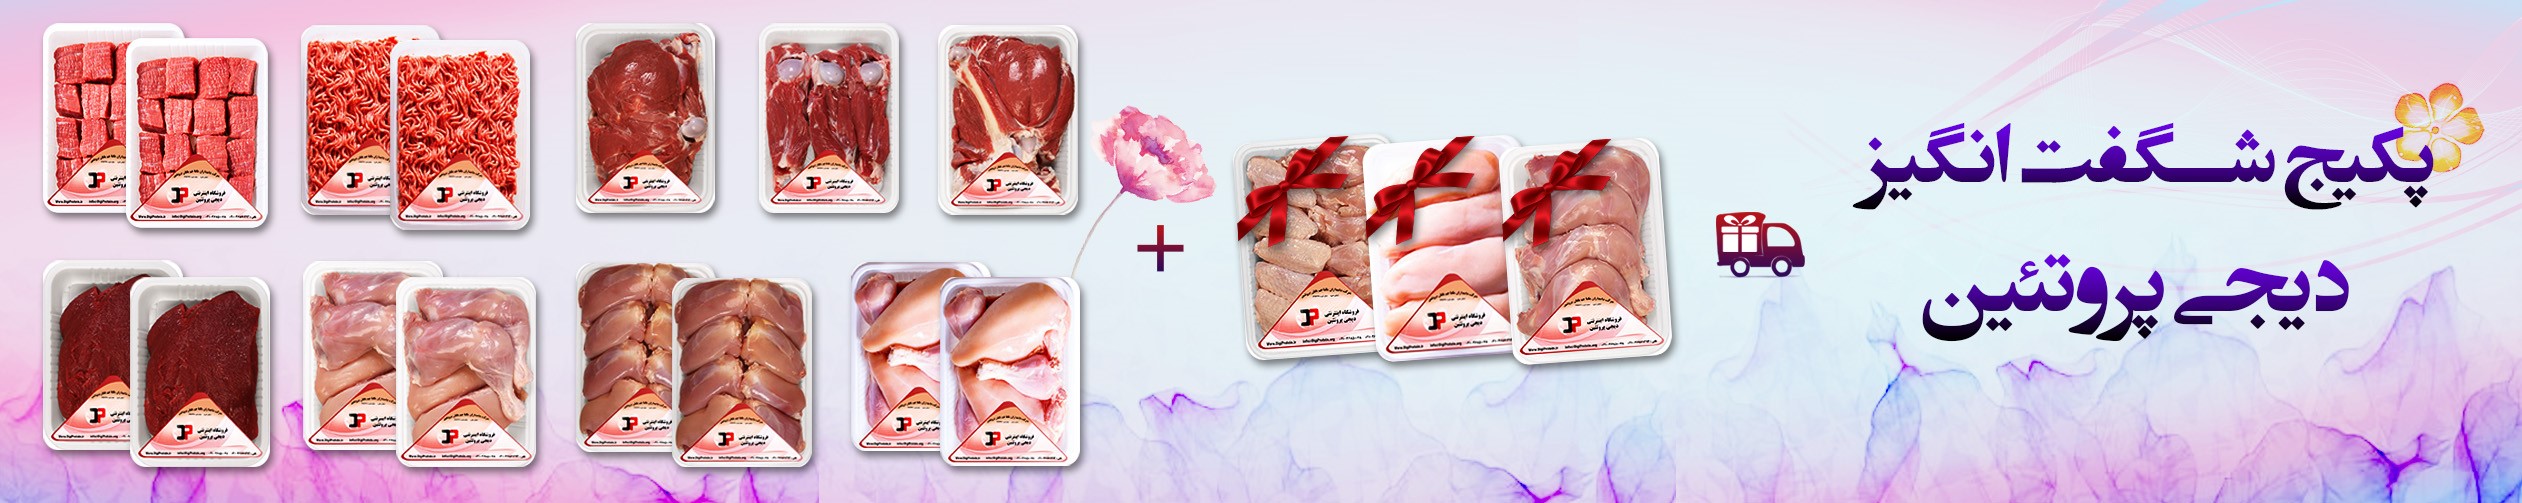 http://digiprotein.ir/Meat-product/Digi-Protein-Packages